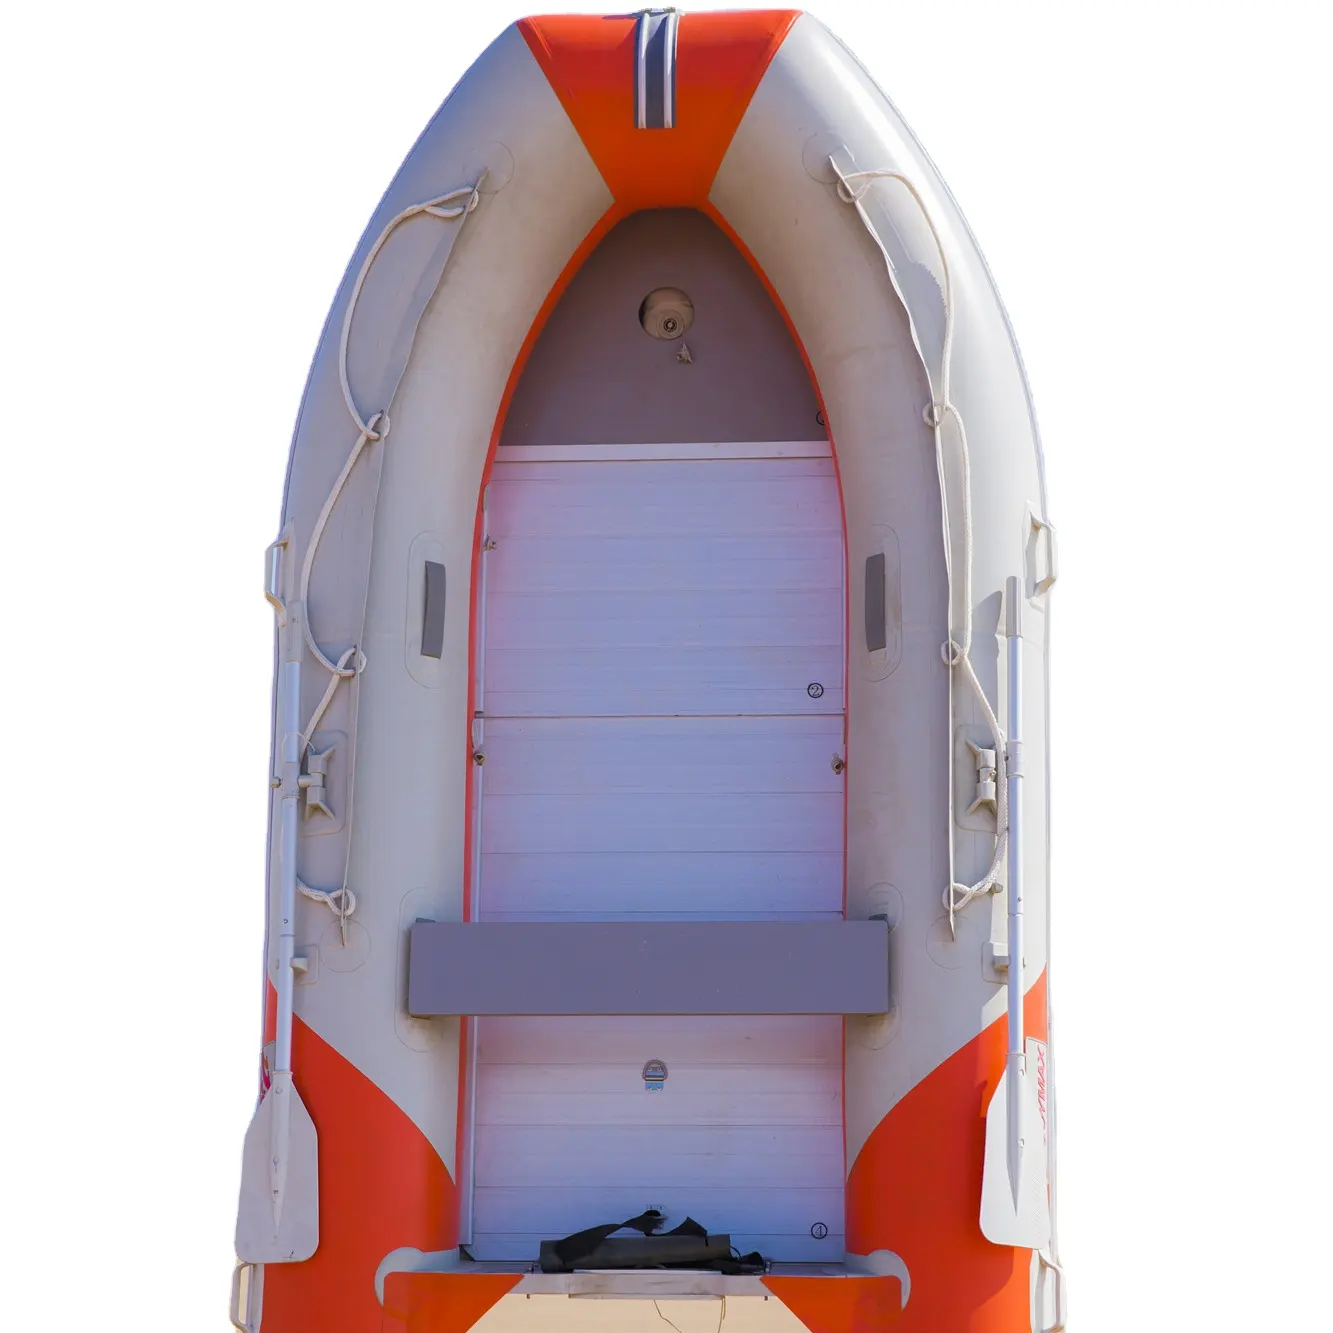 2023 hot Sell Inflatable boat small luxury yacht 3.6m 12ft big back storage inflatable aluminum hull